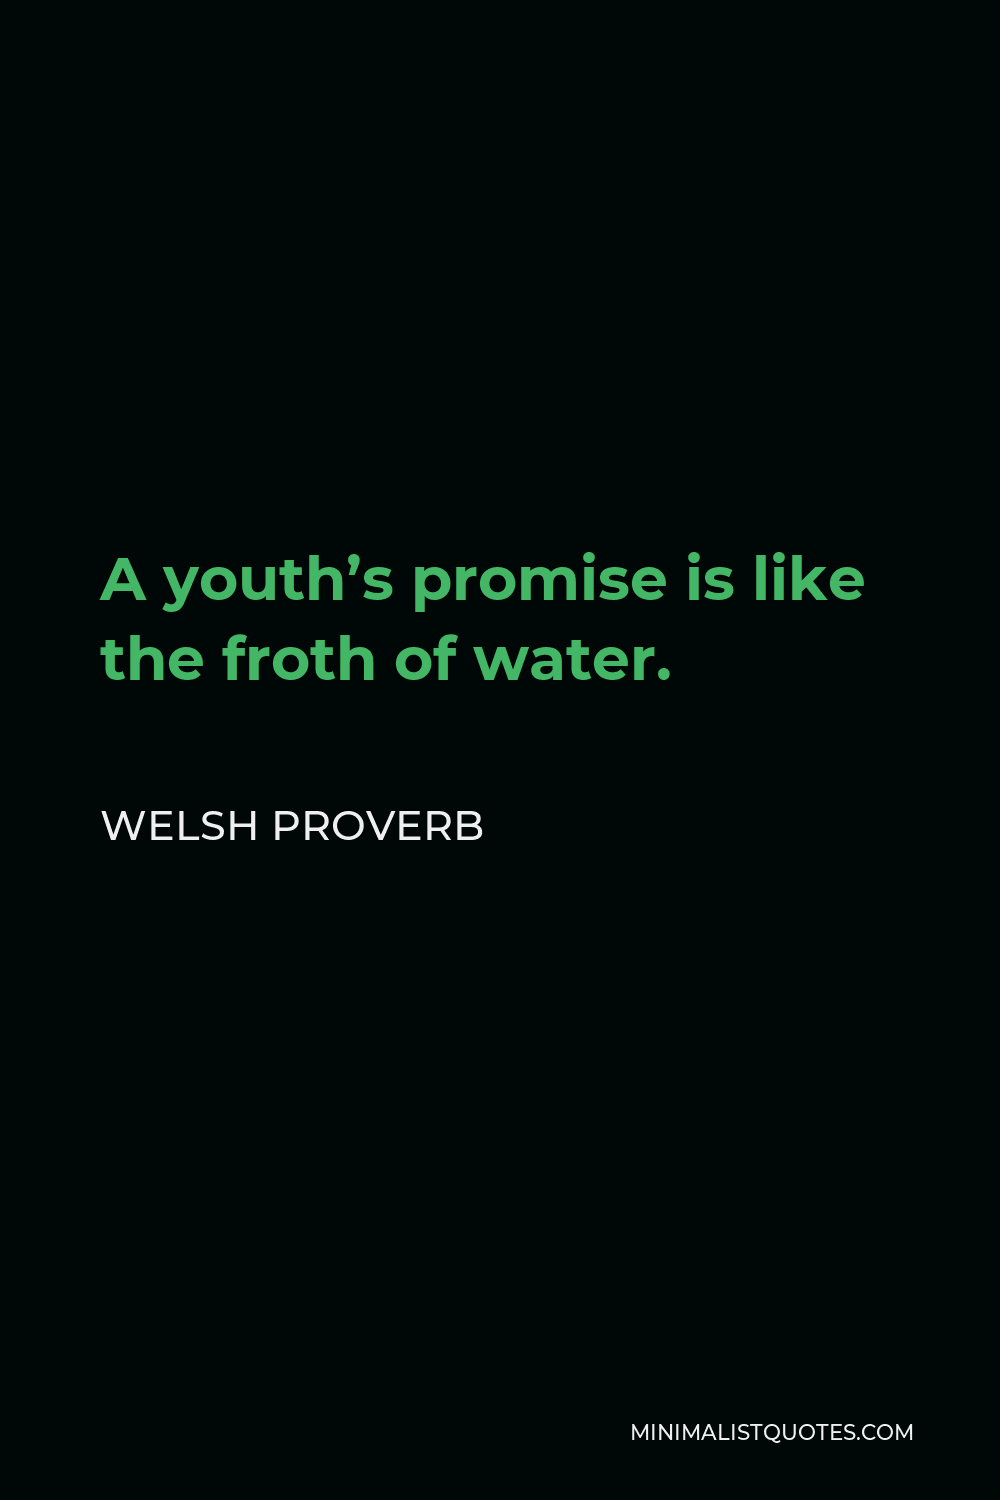 Welsh Proverb Quote - A youth’s promise is like the froth of water.